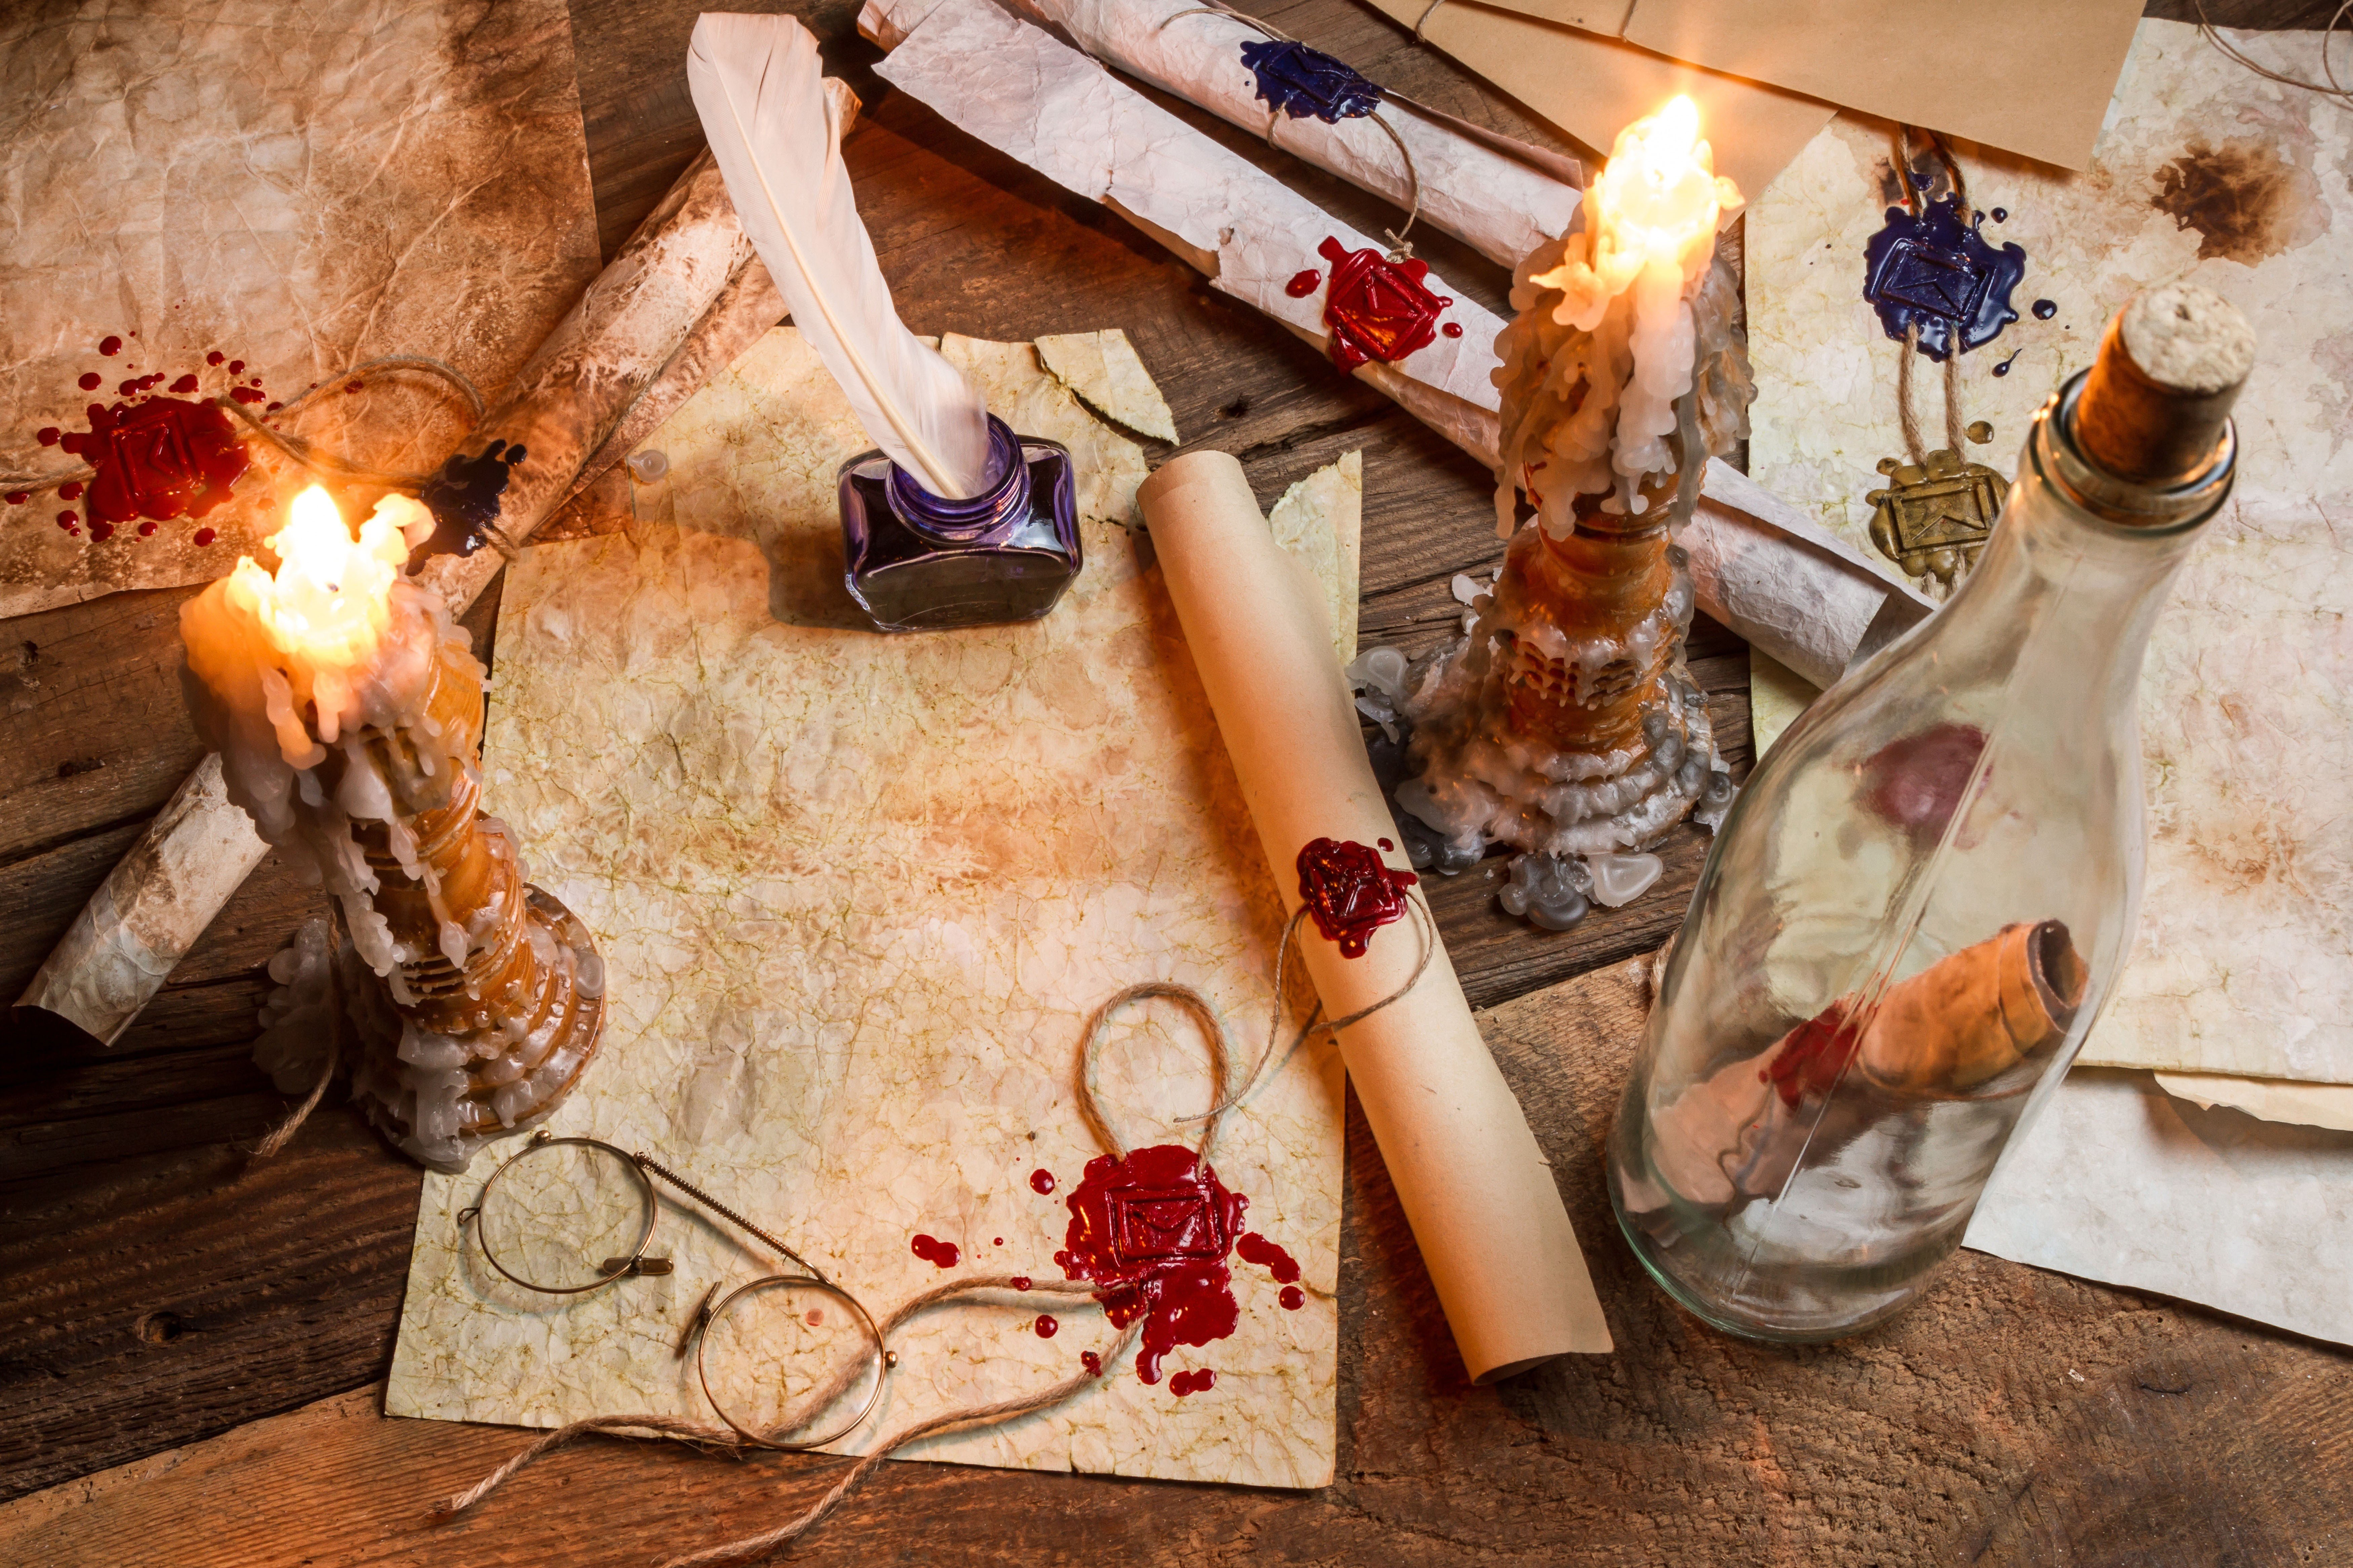 candles, Bottles, Table, Glasses, Wax, Wood, Feathers Wallpaper